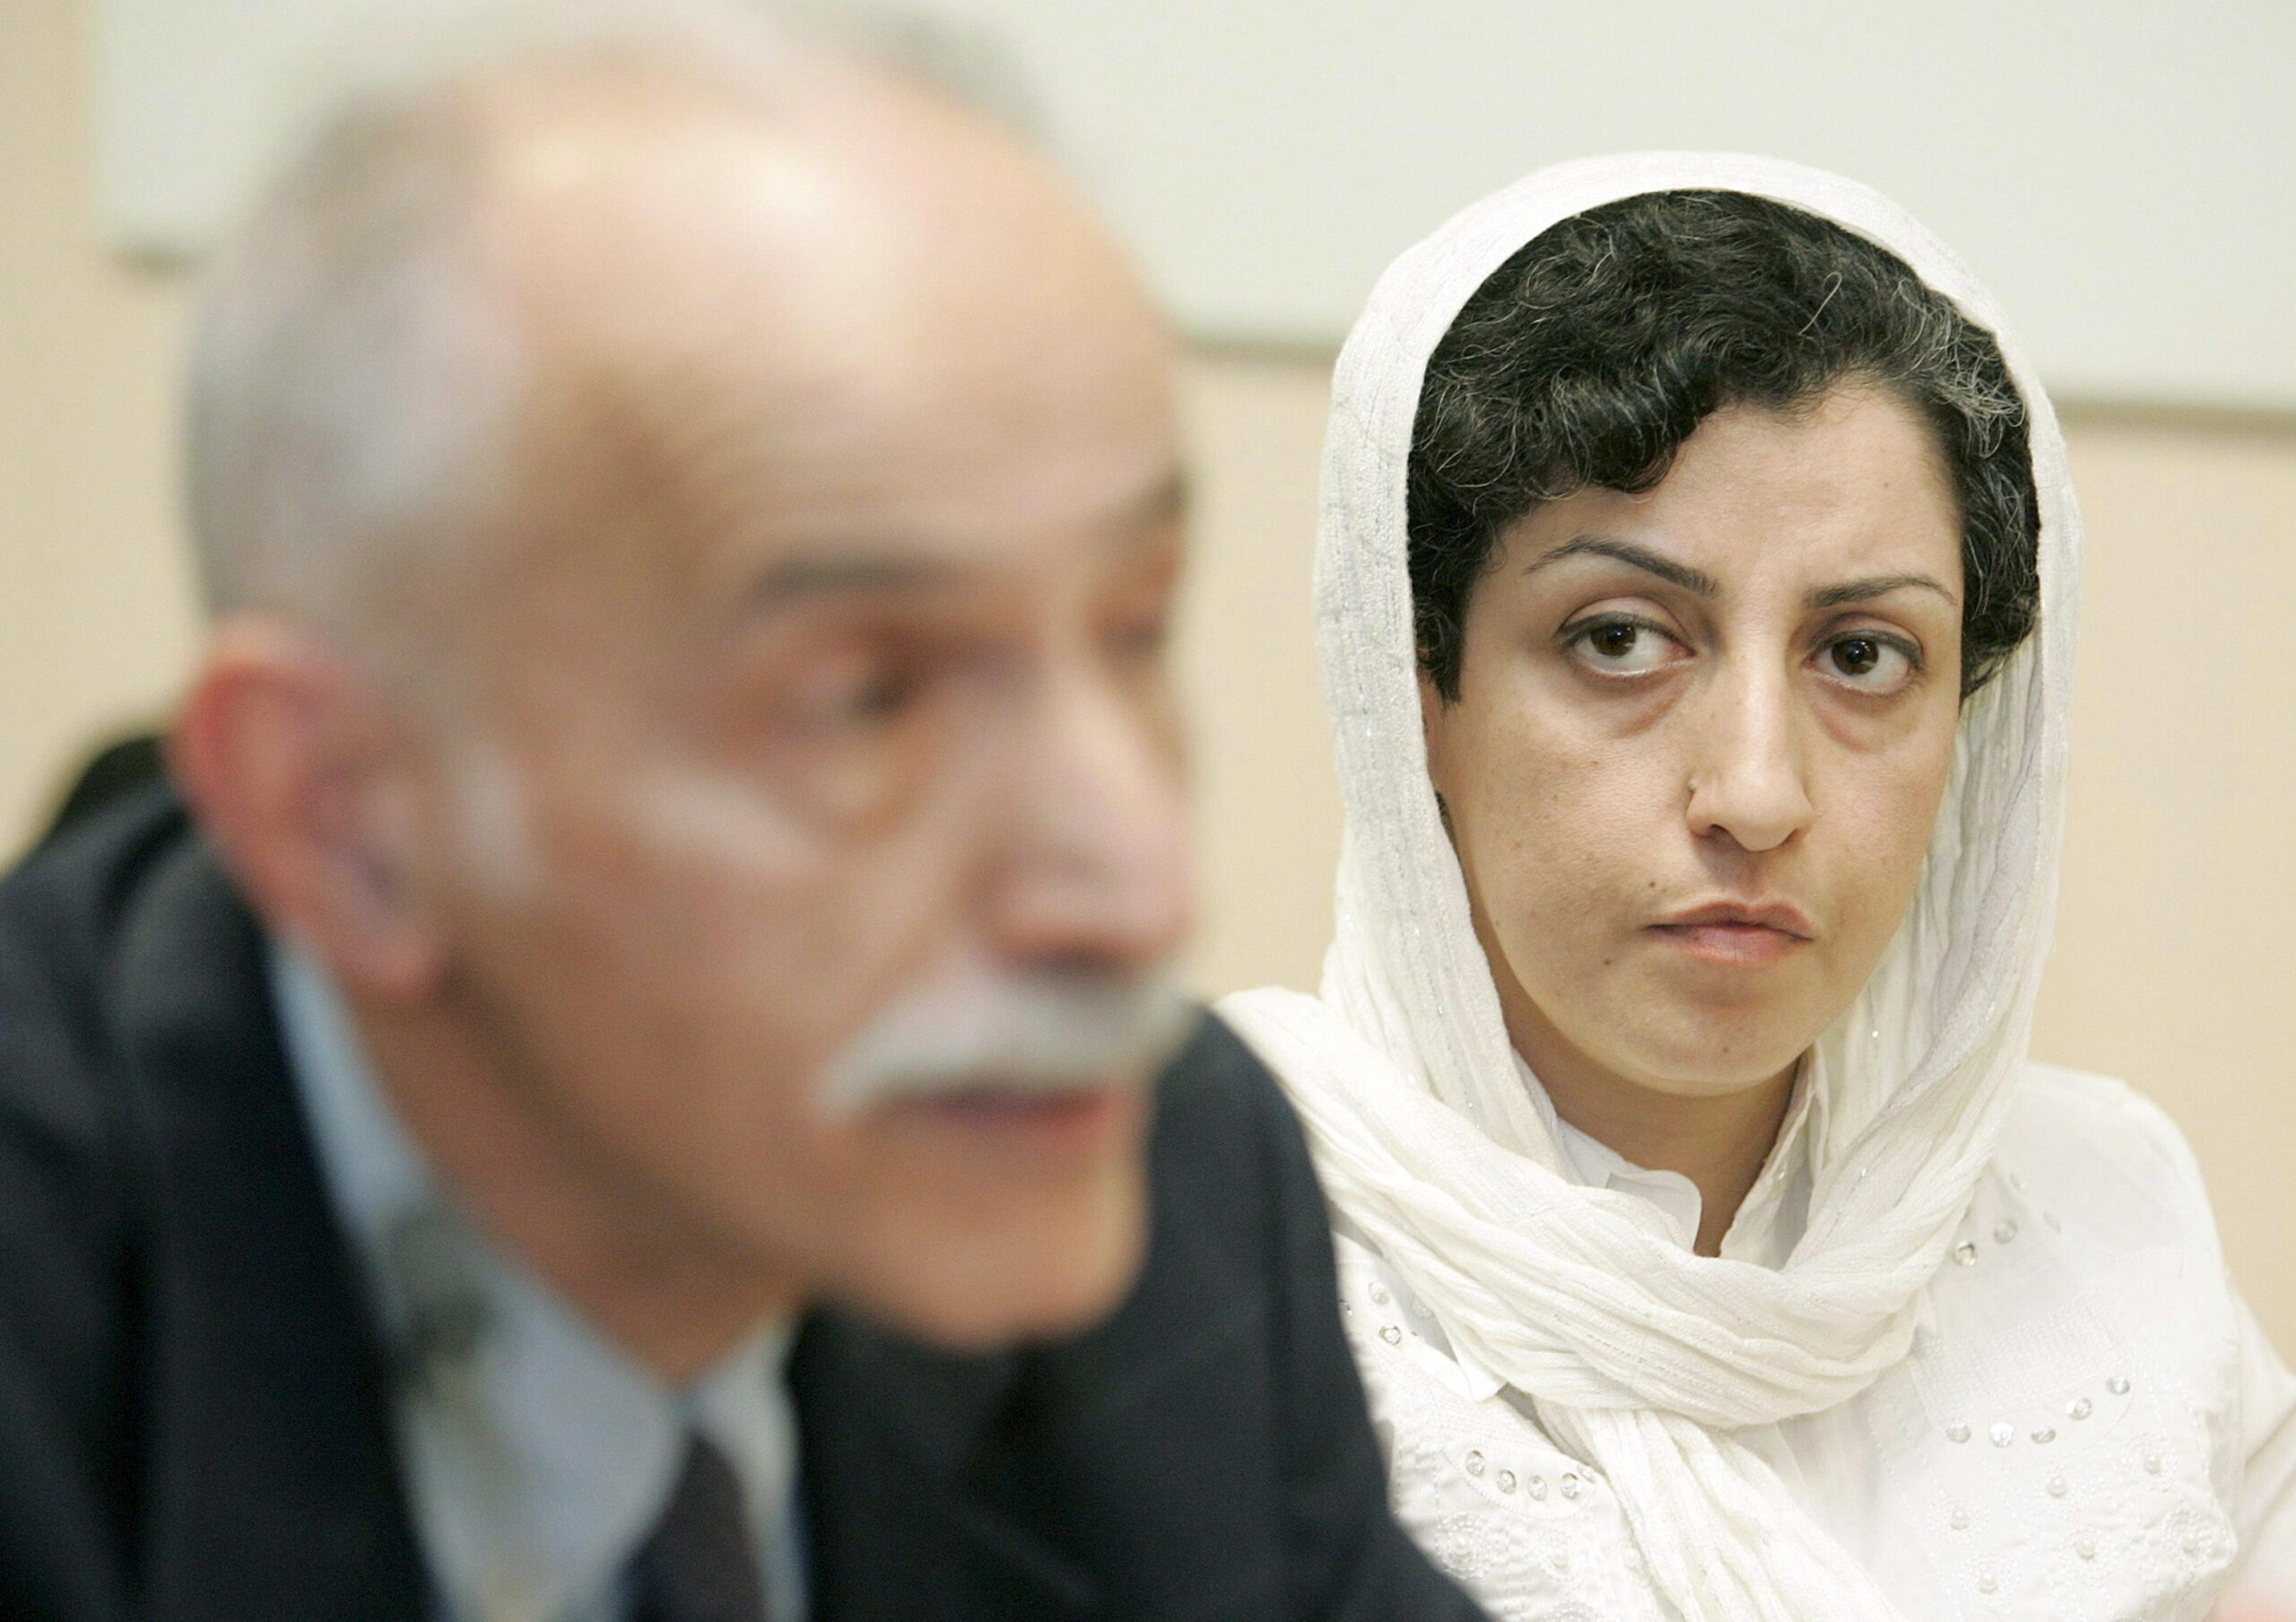 Iran, the latest outrage on the day the UN Human Rights Forum “takes over”.  No treatment for Nobel laureate Mohammadi: “I refused to wear the hijab”